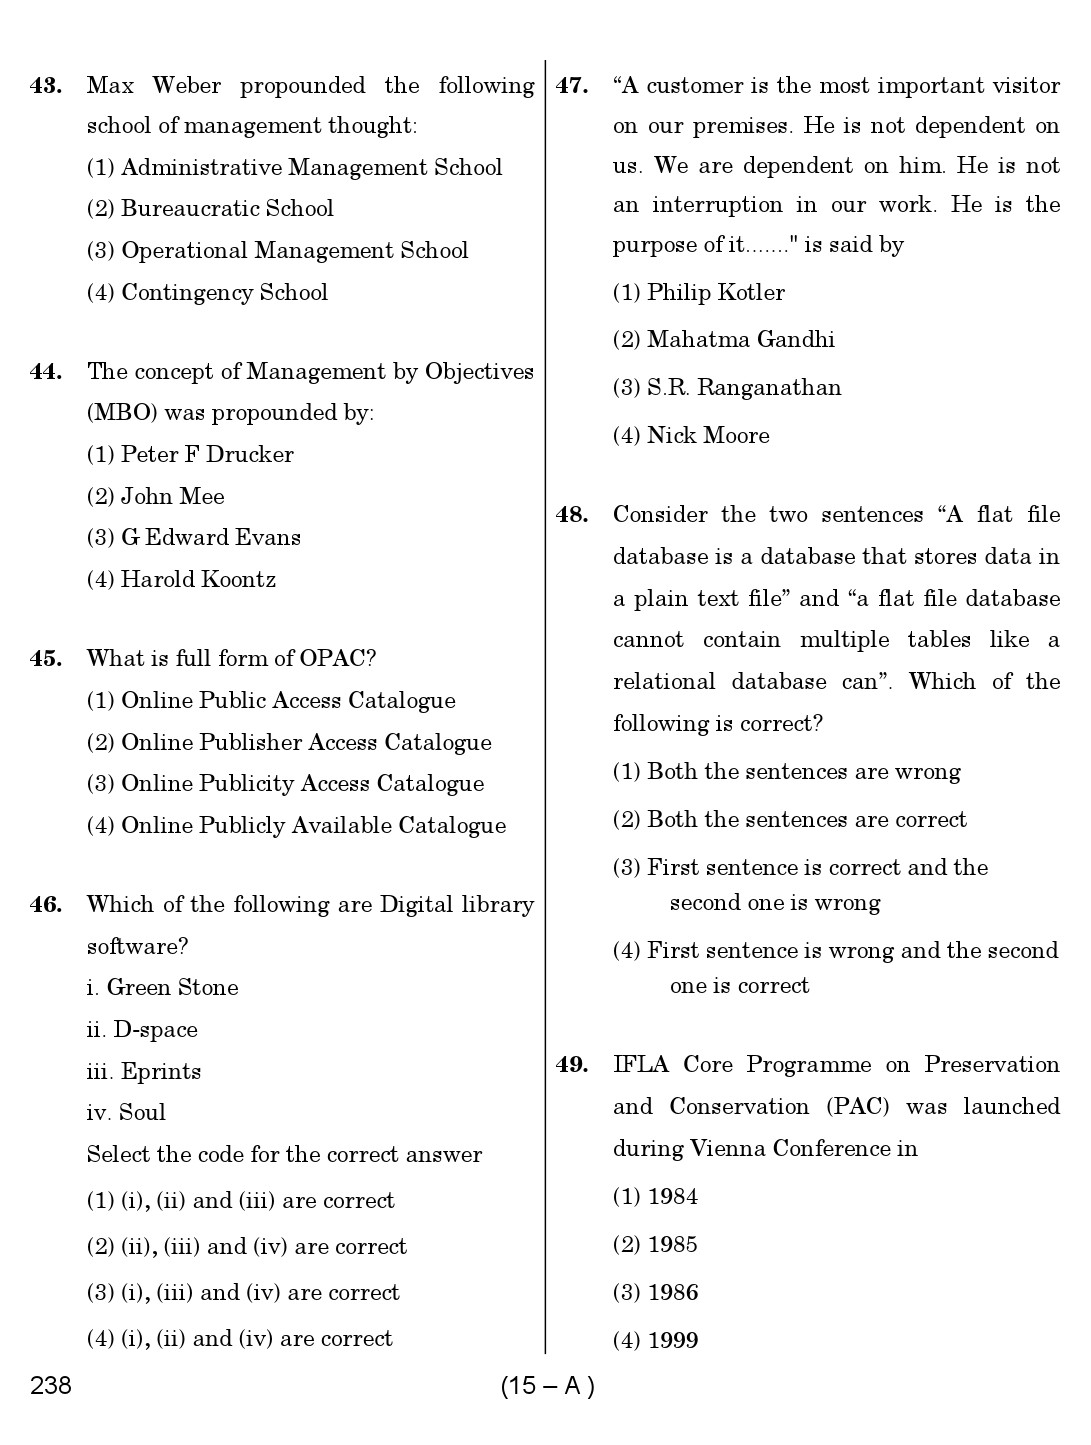 Karnataka PSC 238 Specific Paper II Librarian Exam Sample Question Paper 15